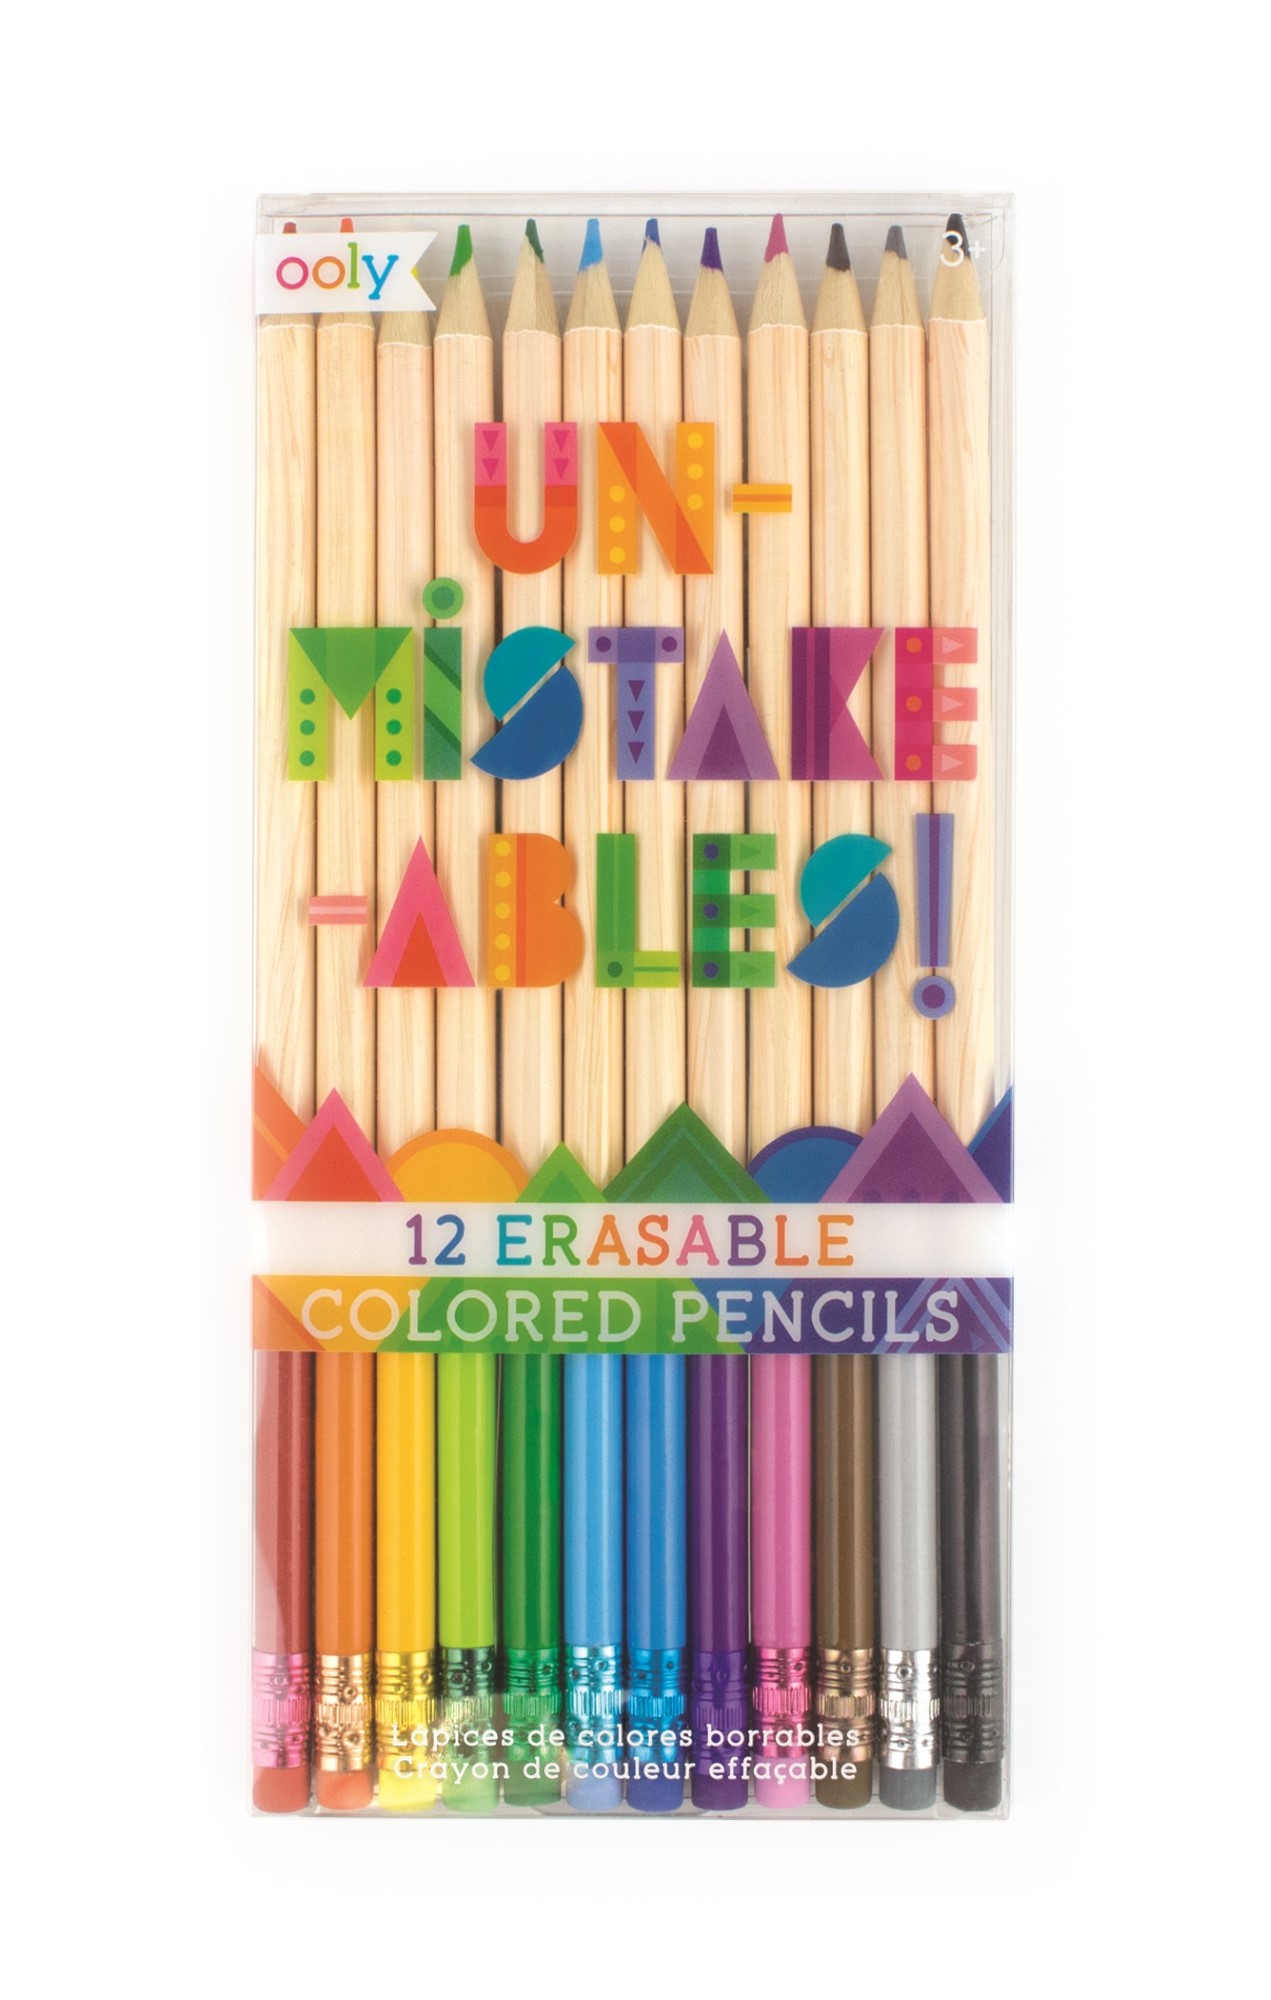 Ooly Unmistakeables Erasable Colored Pencils (Set of 12)